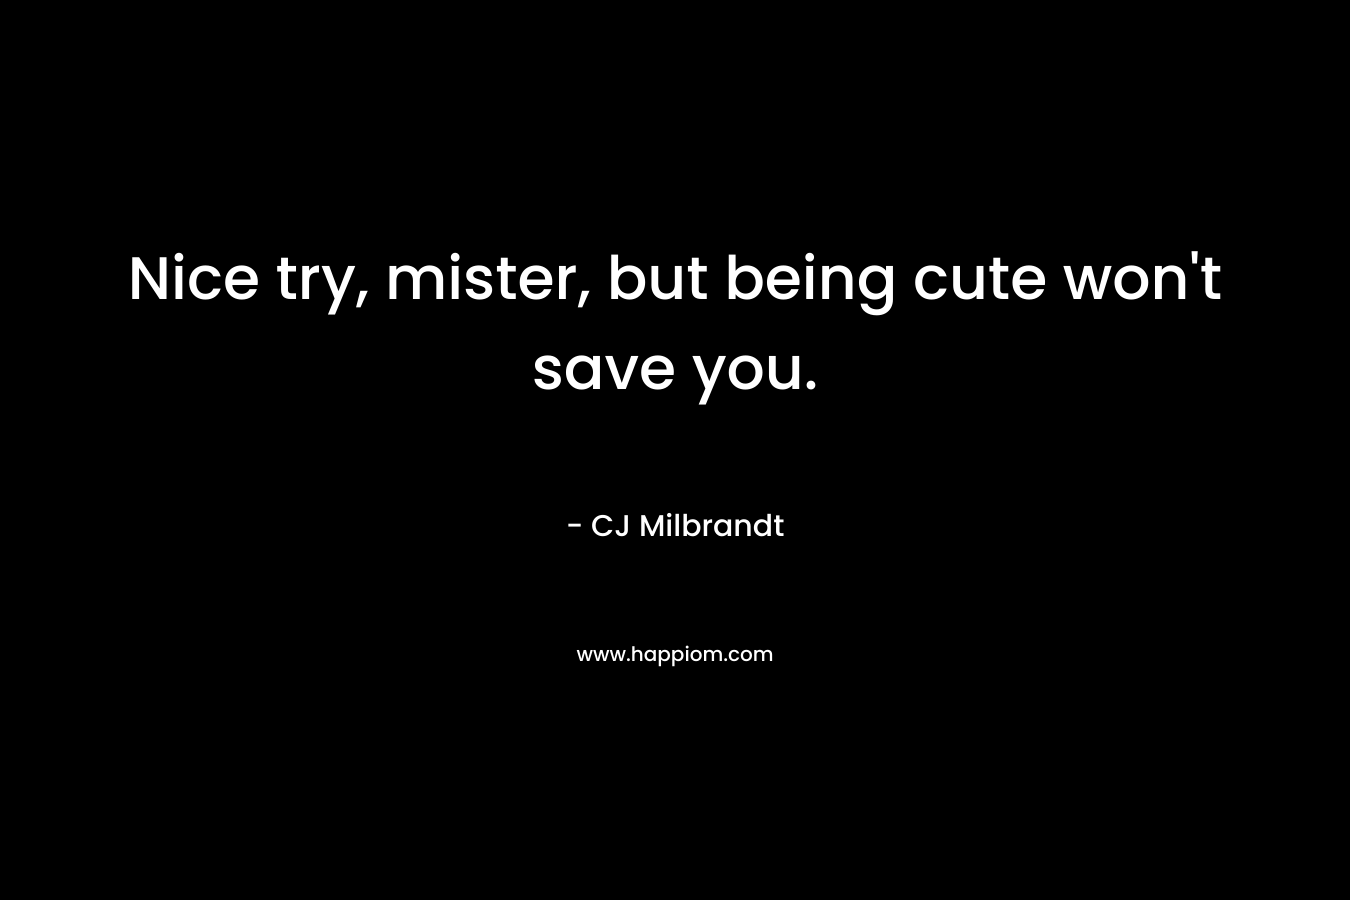 Nice try, mister, but being cute won’t save you. – CJ Milbrandt